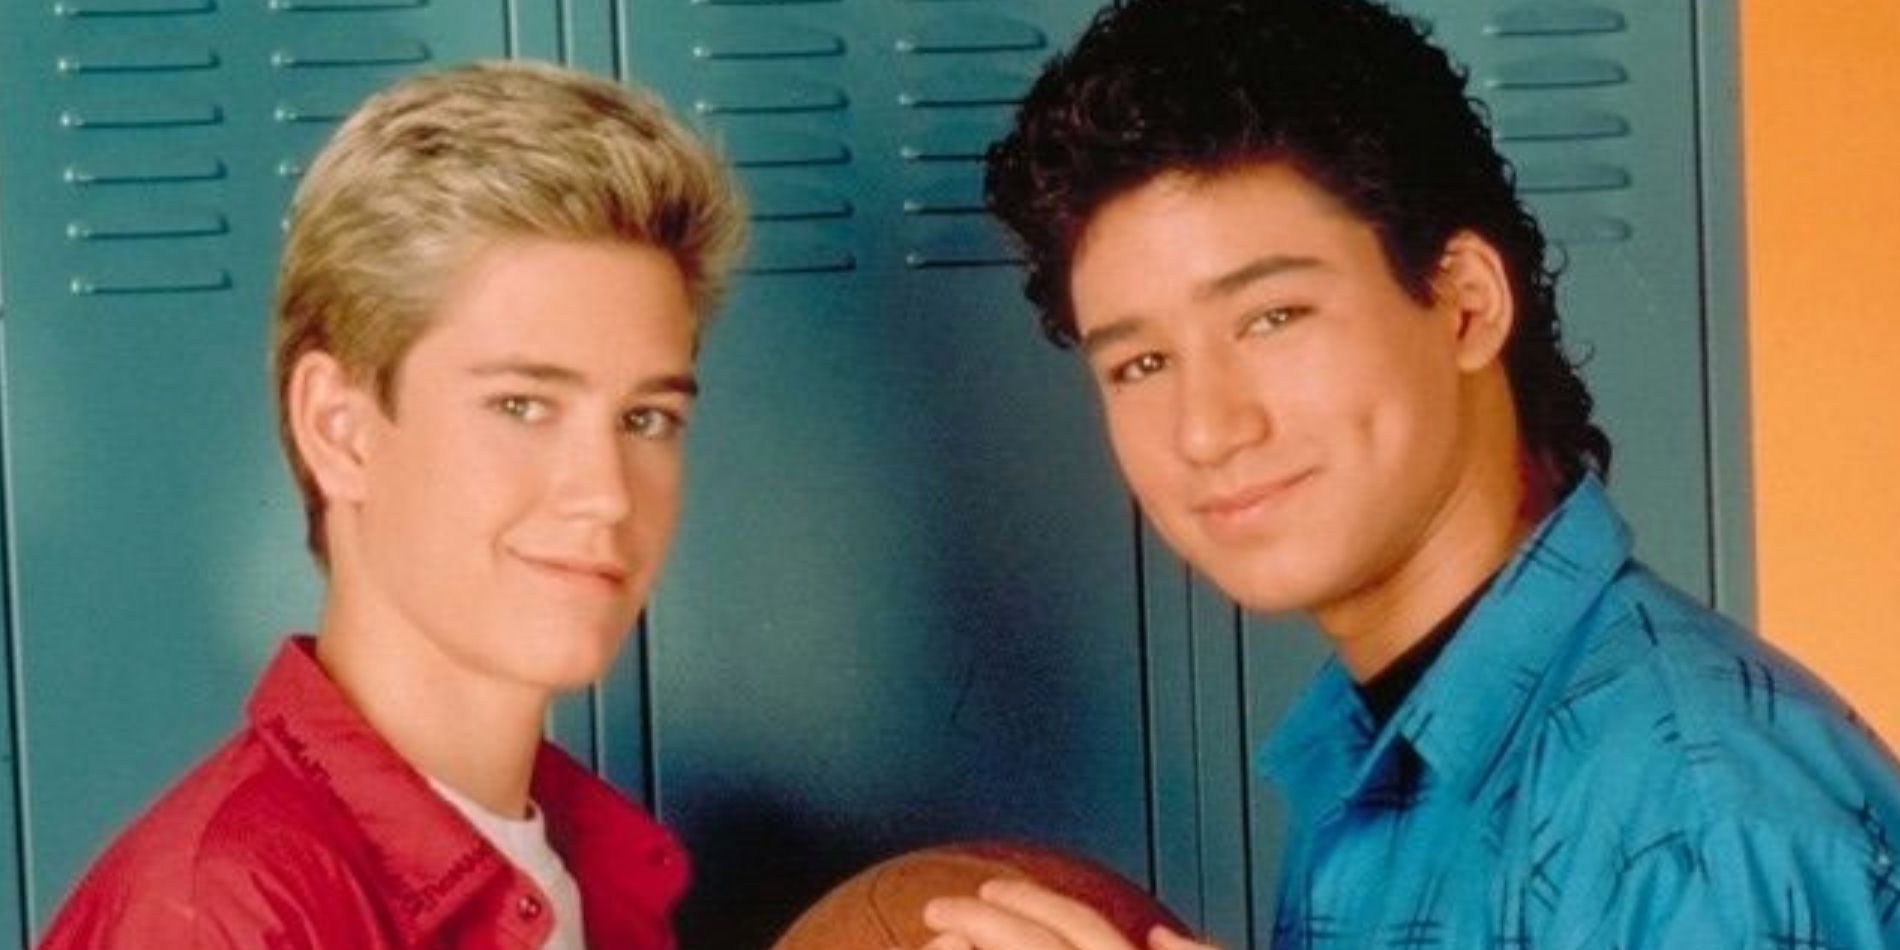 Zack And Slater In Saved By The Bell